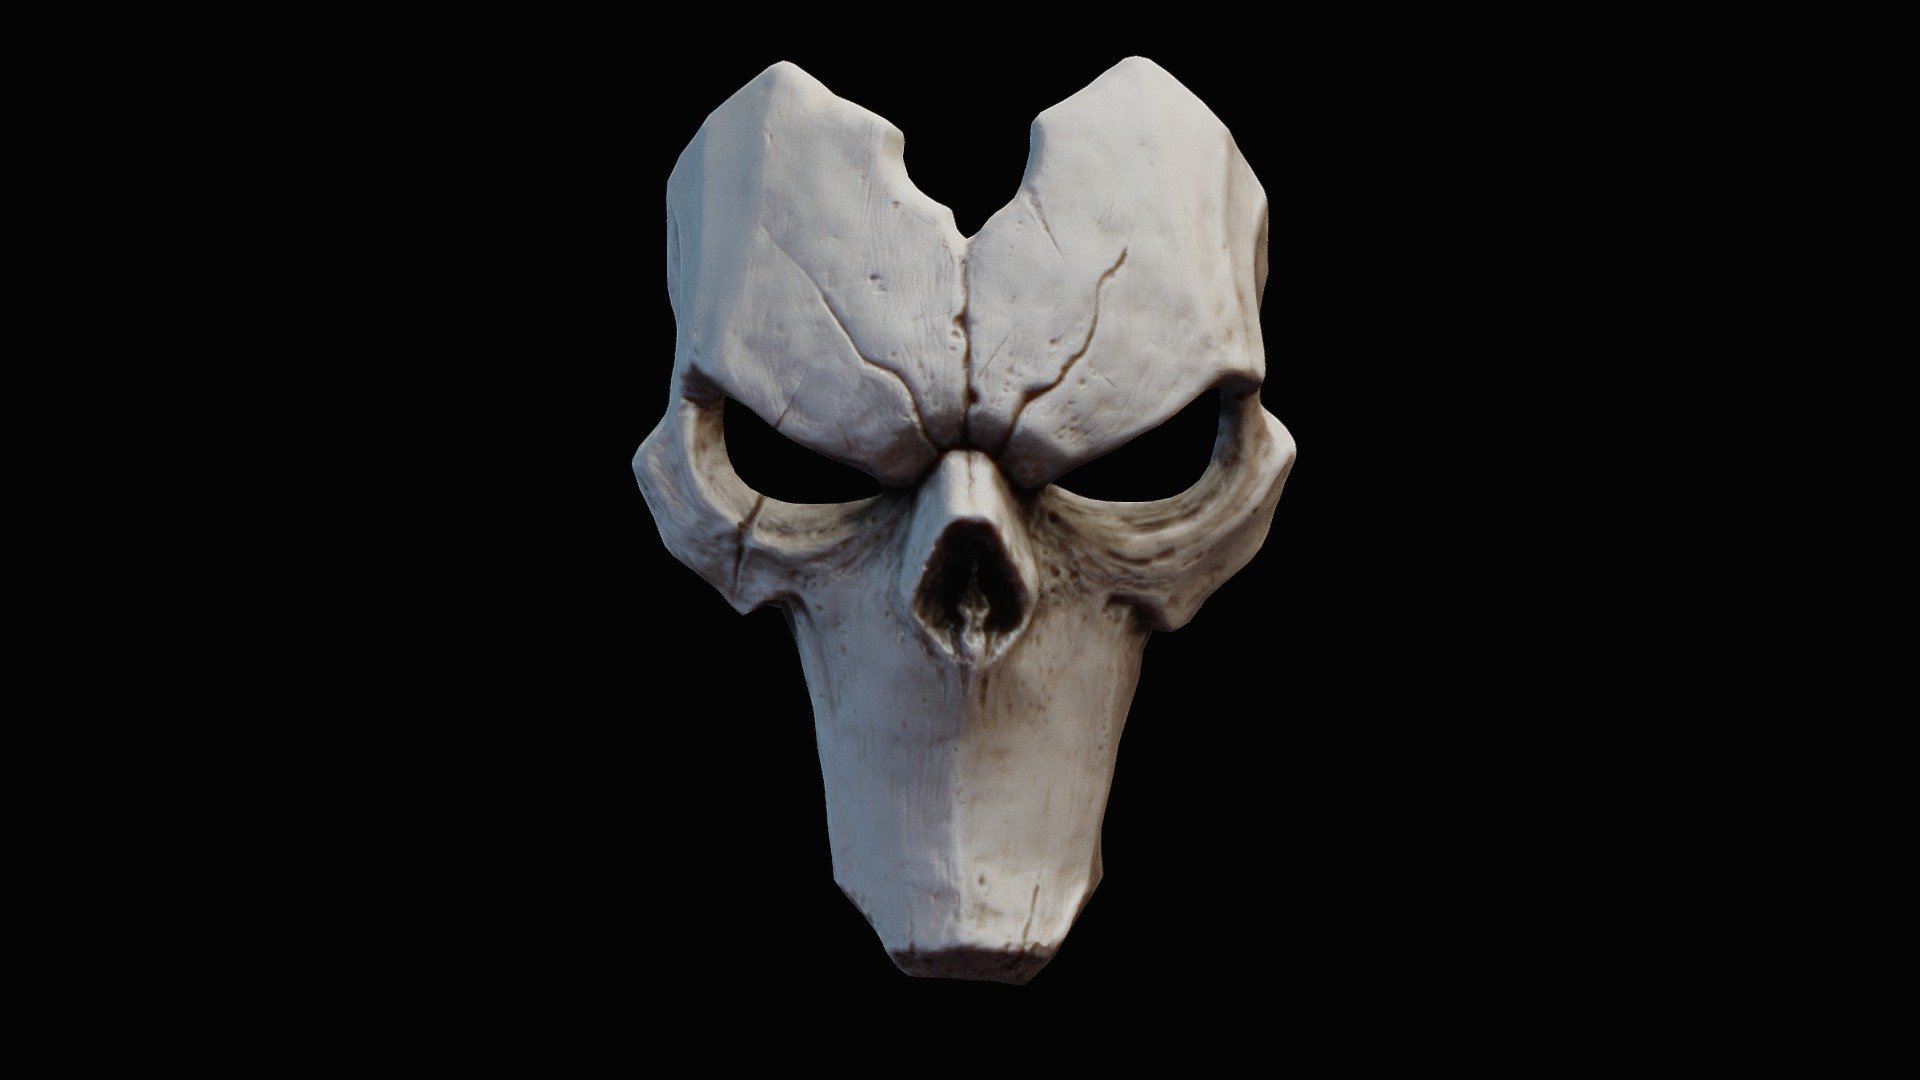 Darksiders Death's Mask - 3D by Flago [647f8aa]